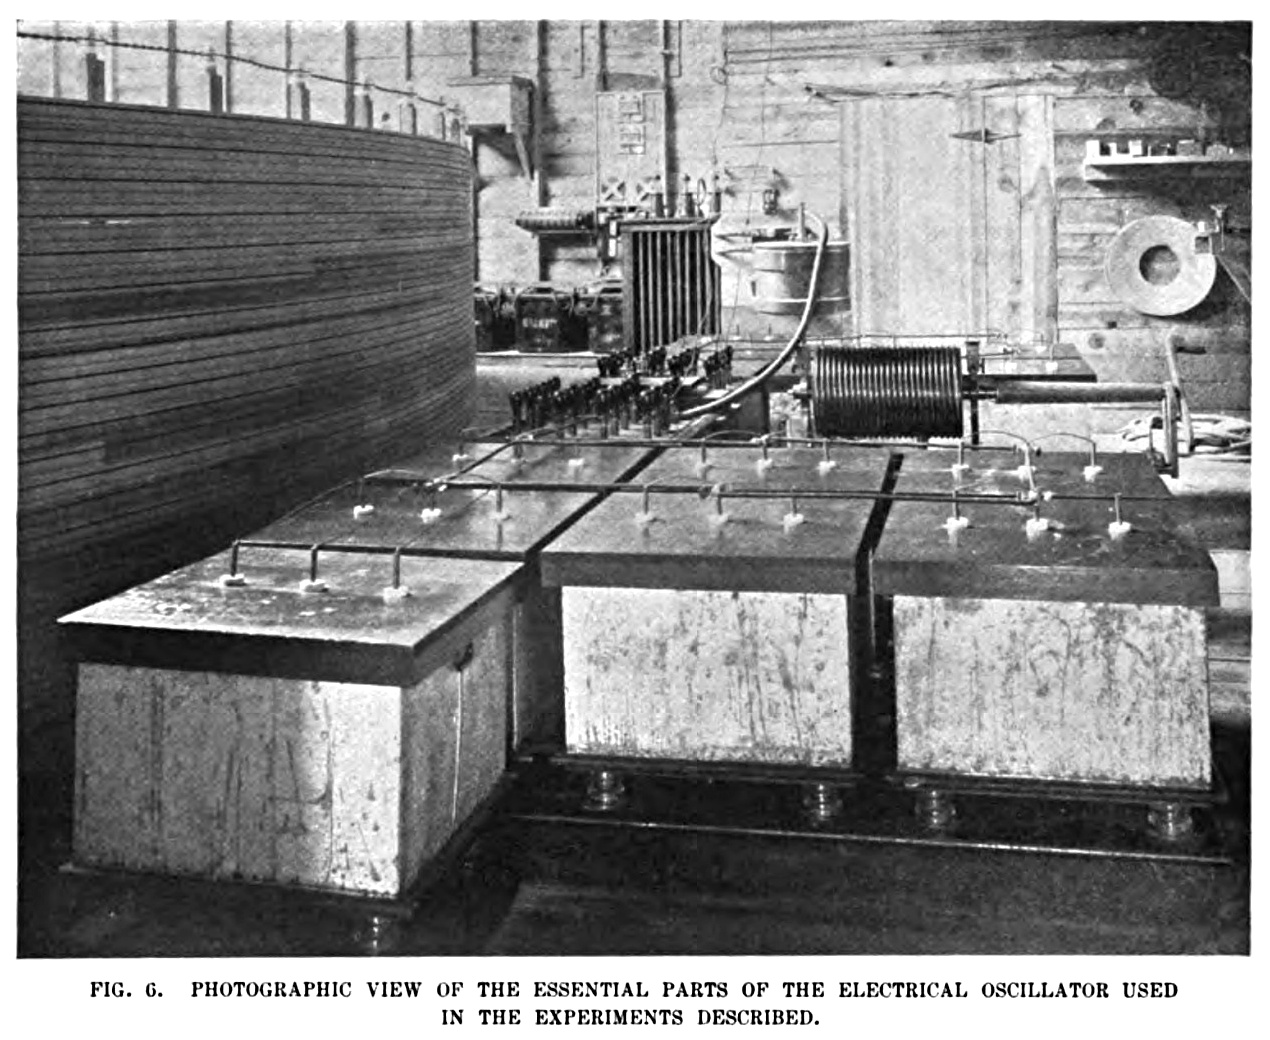 FIG. 6. Photographic view of the essential parts of the electrical oscillator used in the experiments described.